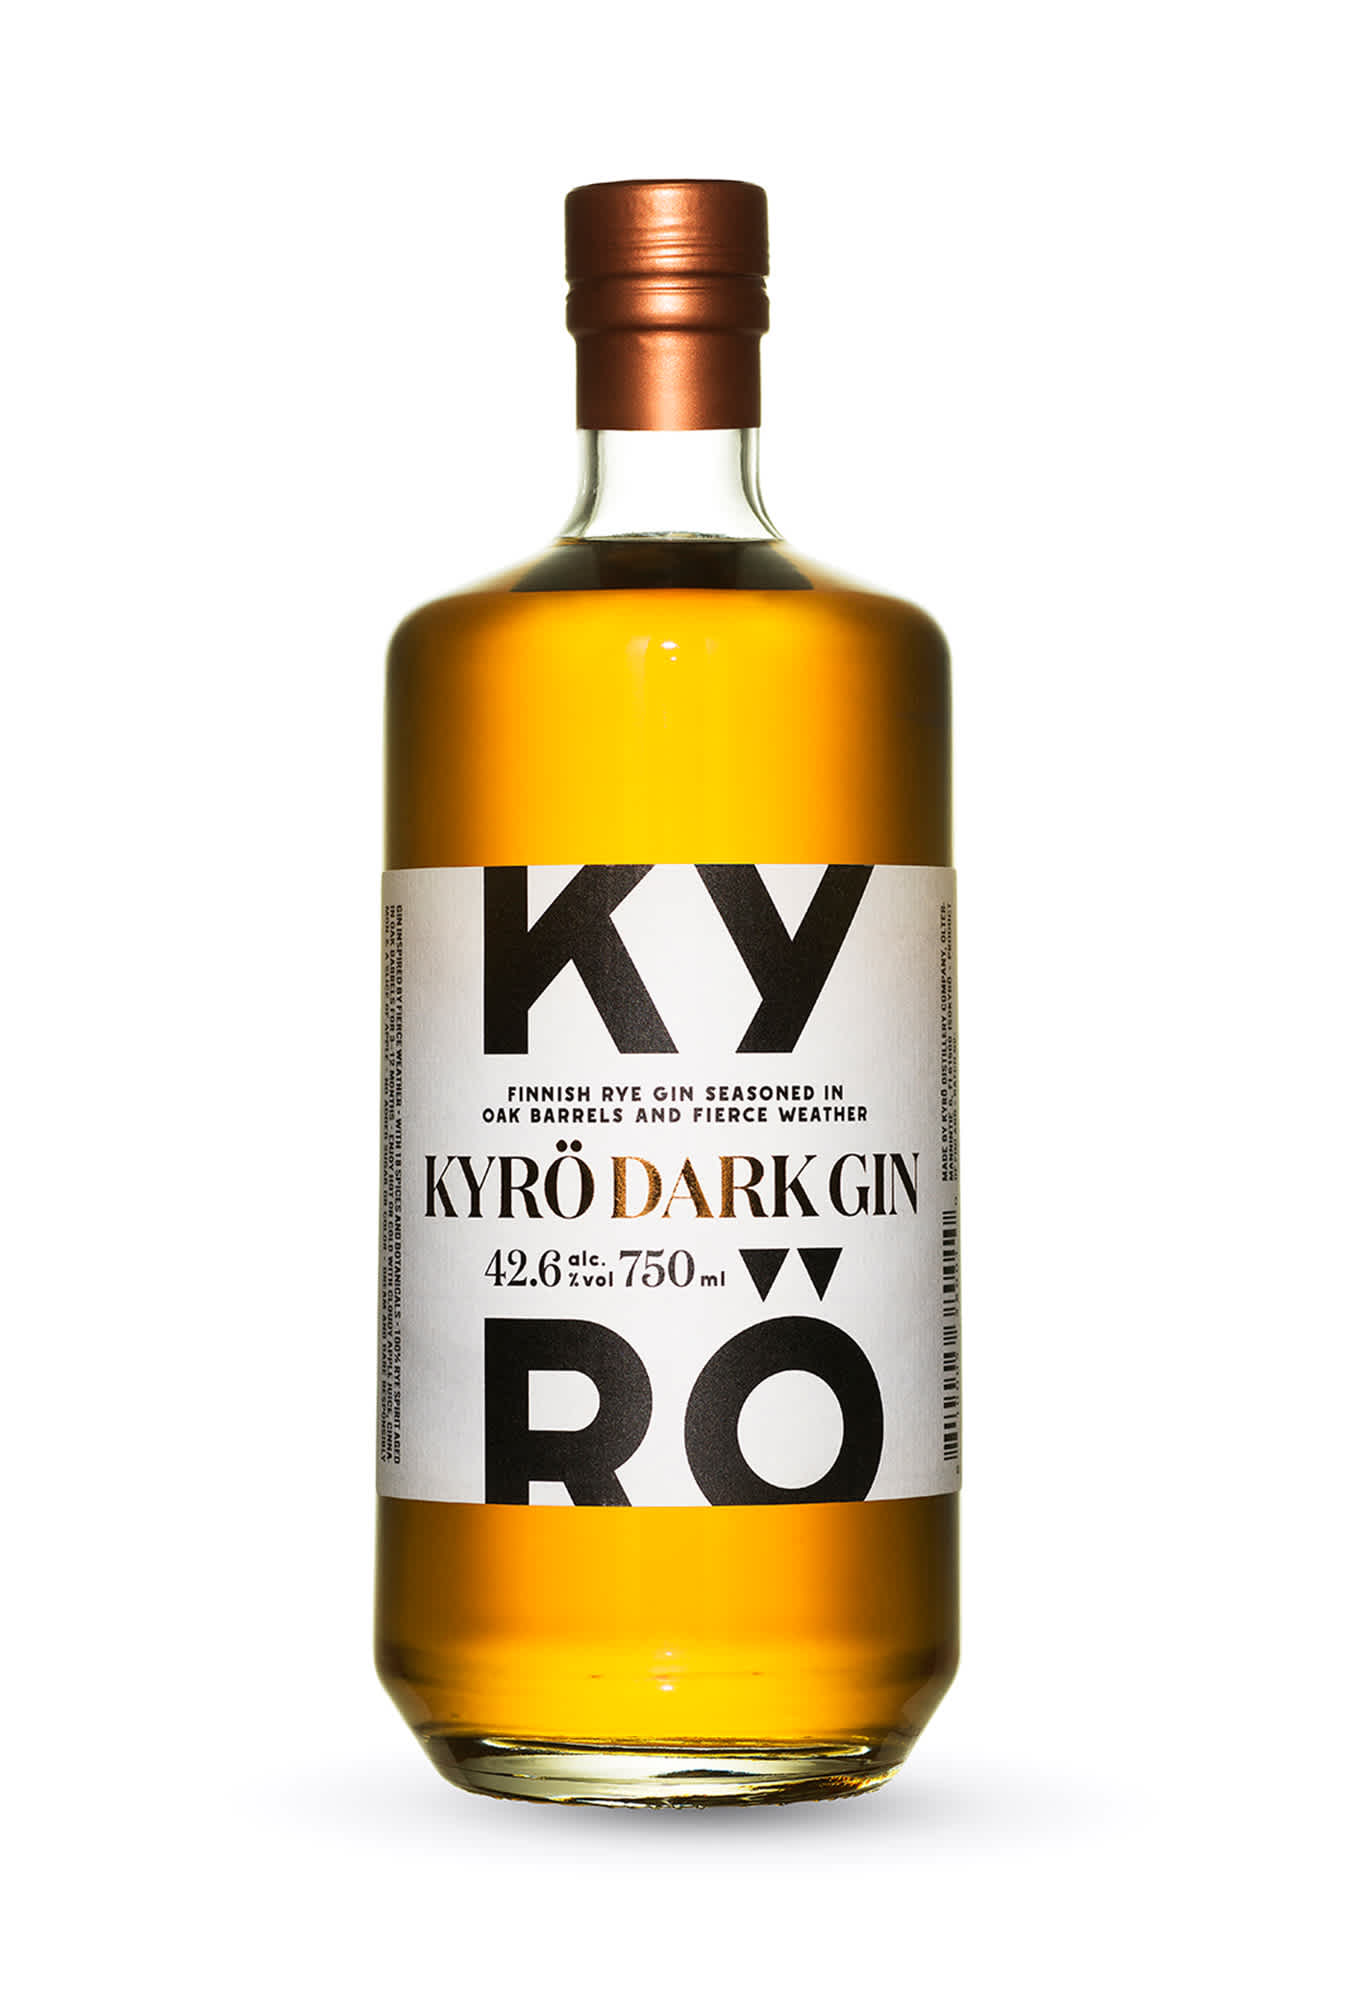 Product photo: 750 ml bottle of award-winning Kyrö Dark Gin. This barrel-aged gin was first called Koskue Gin.